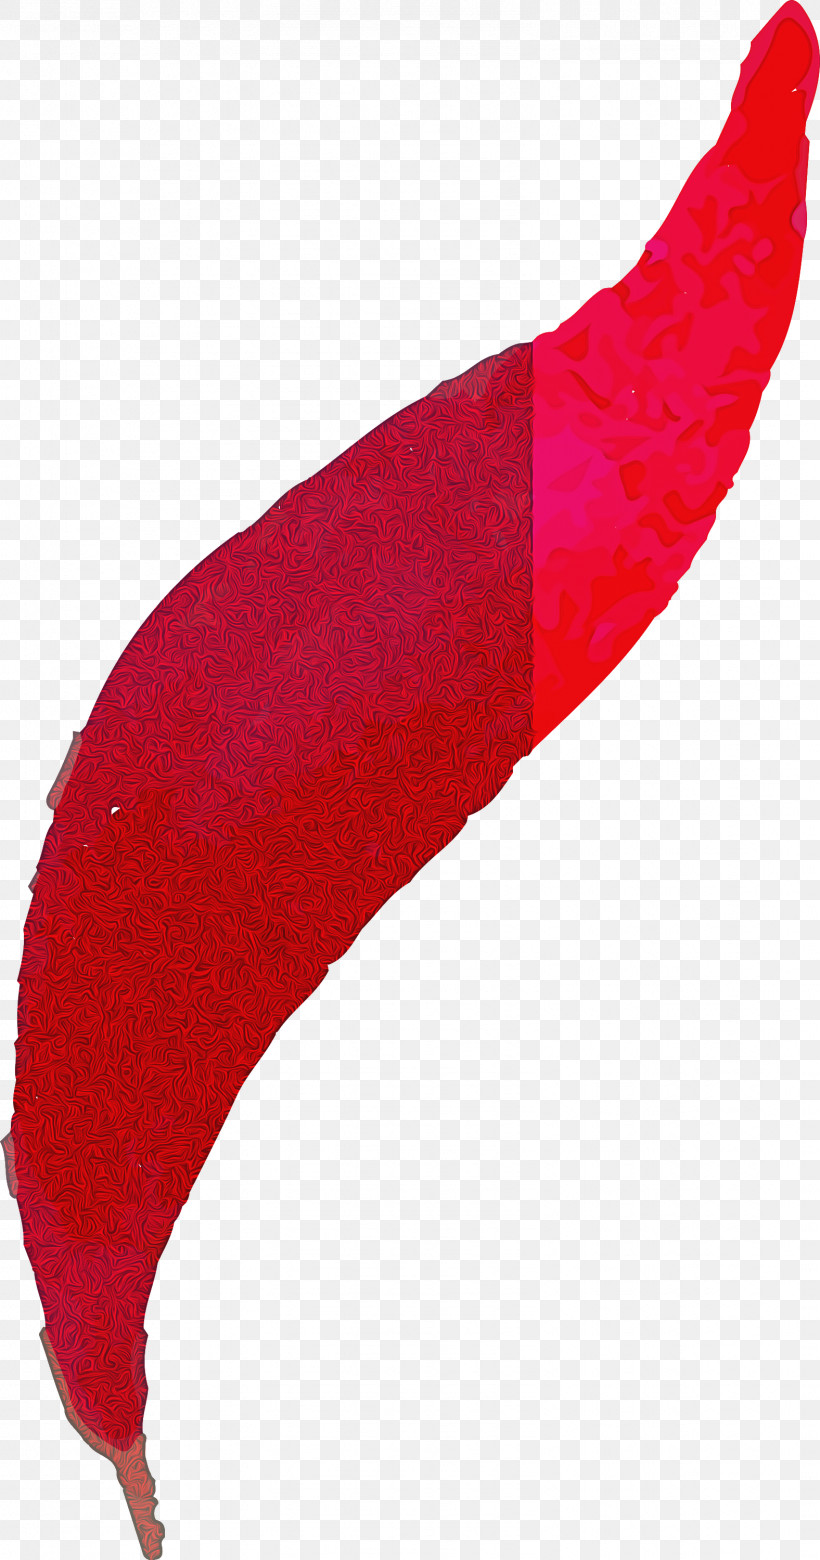 Red, PNG, 1576x3000px, Watercolor Autumn, Red, Watercolor Autumn Leaf, Watercolor Leaf Download Free